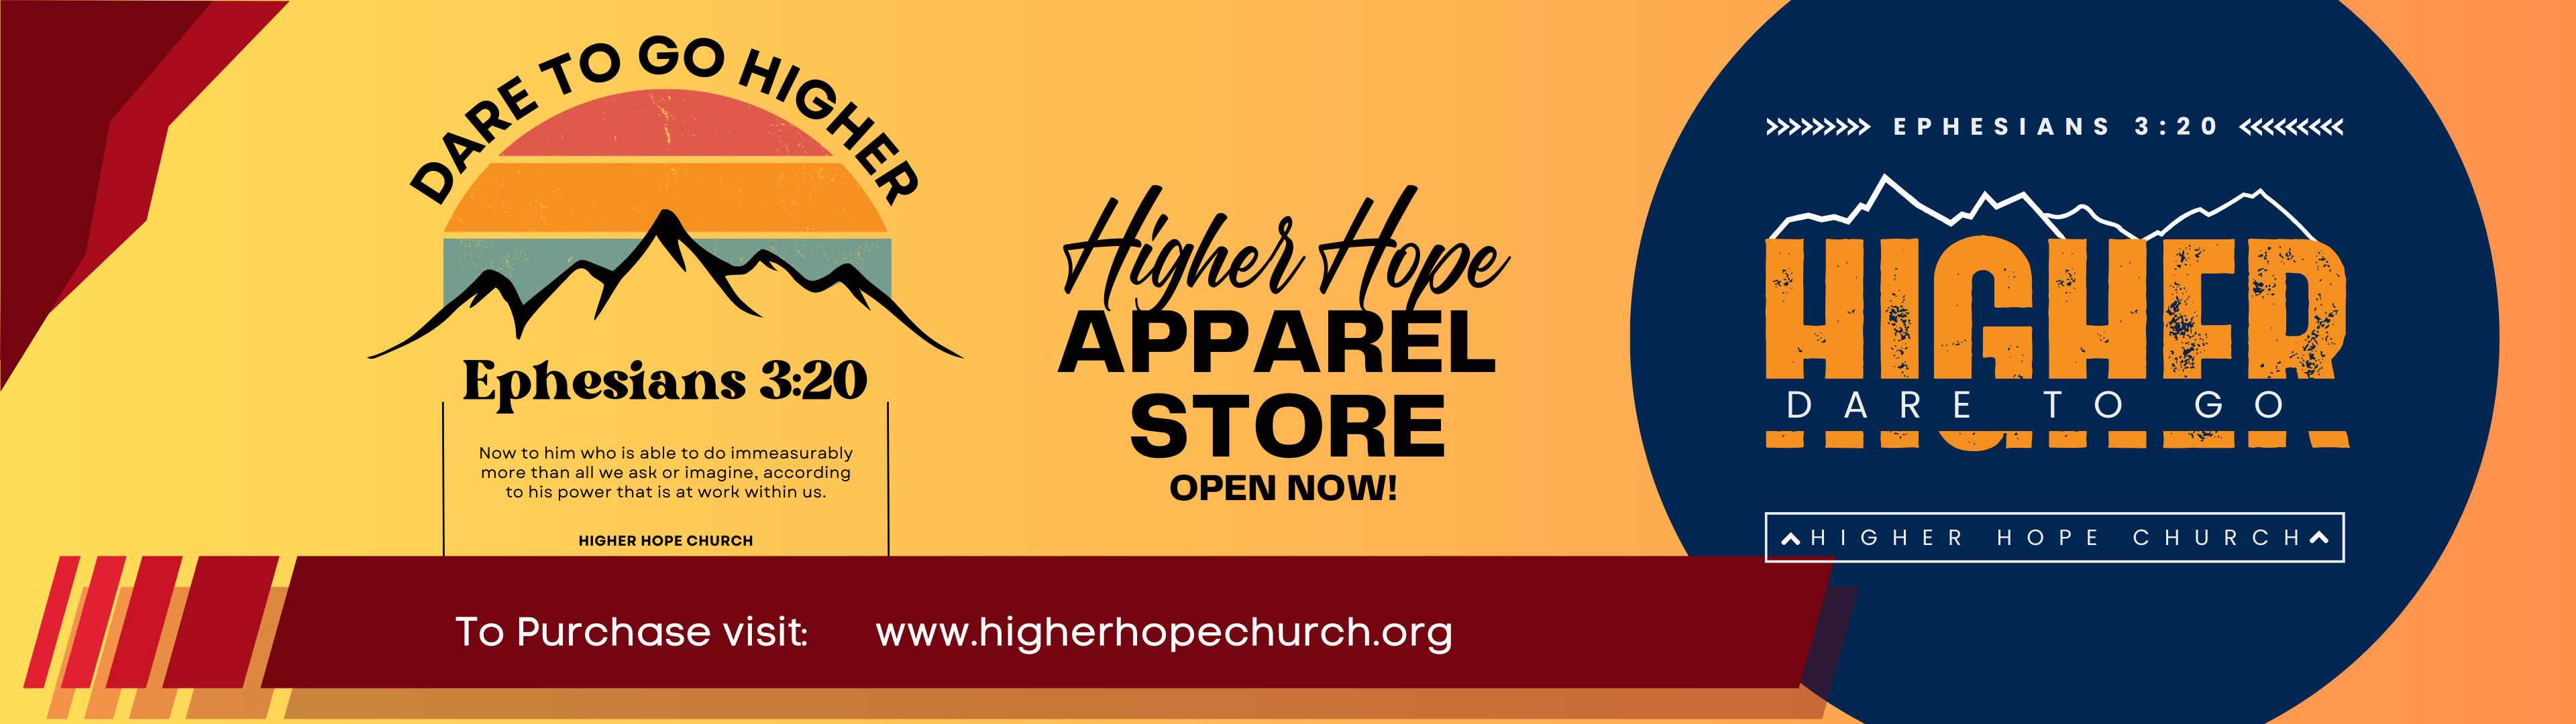 Higher Hope apparel store (2)